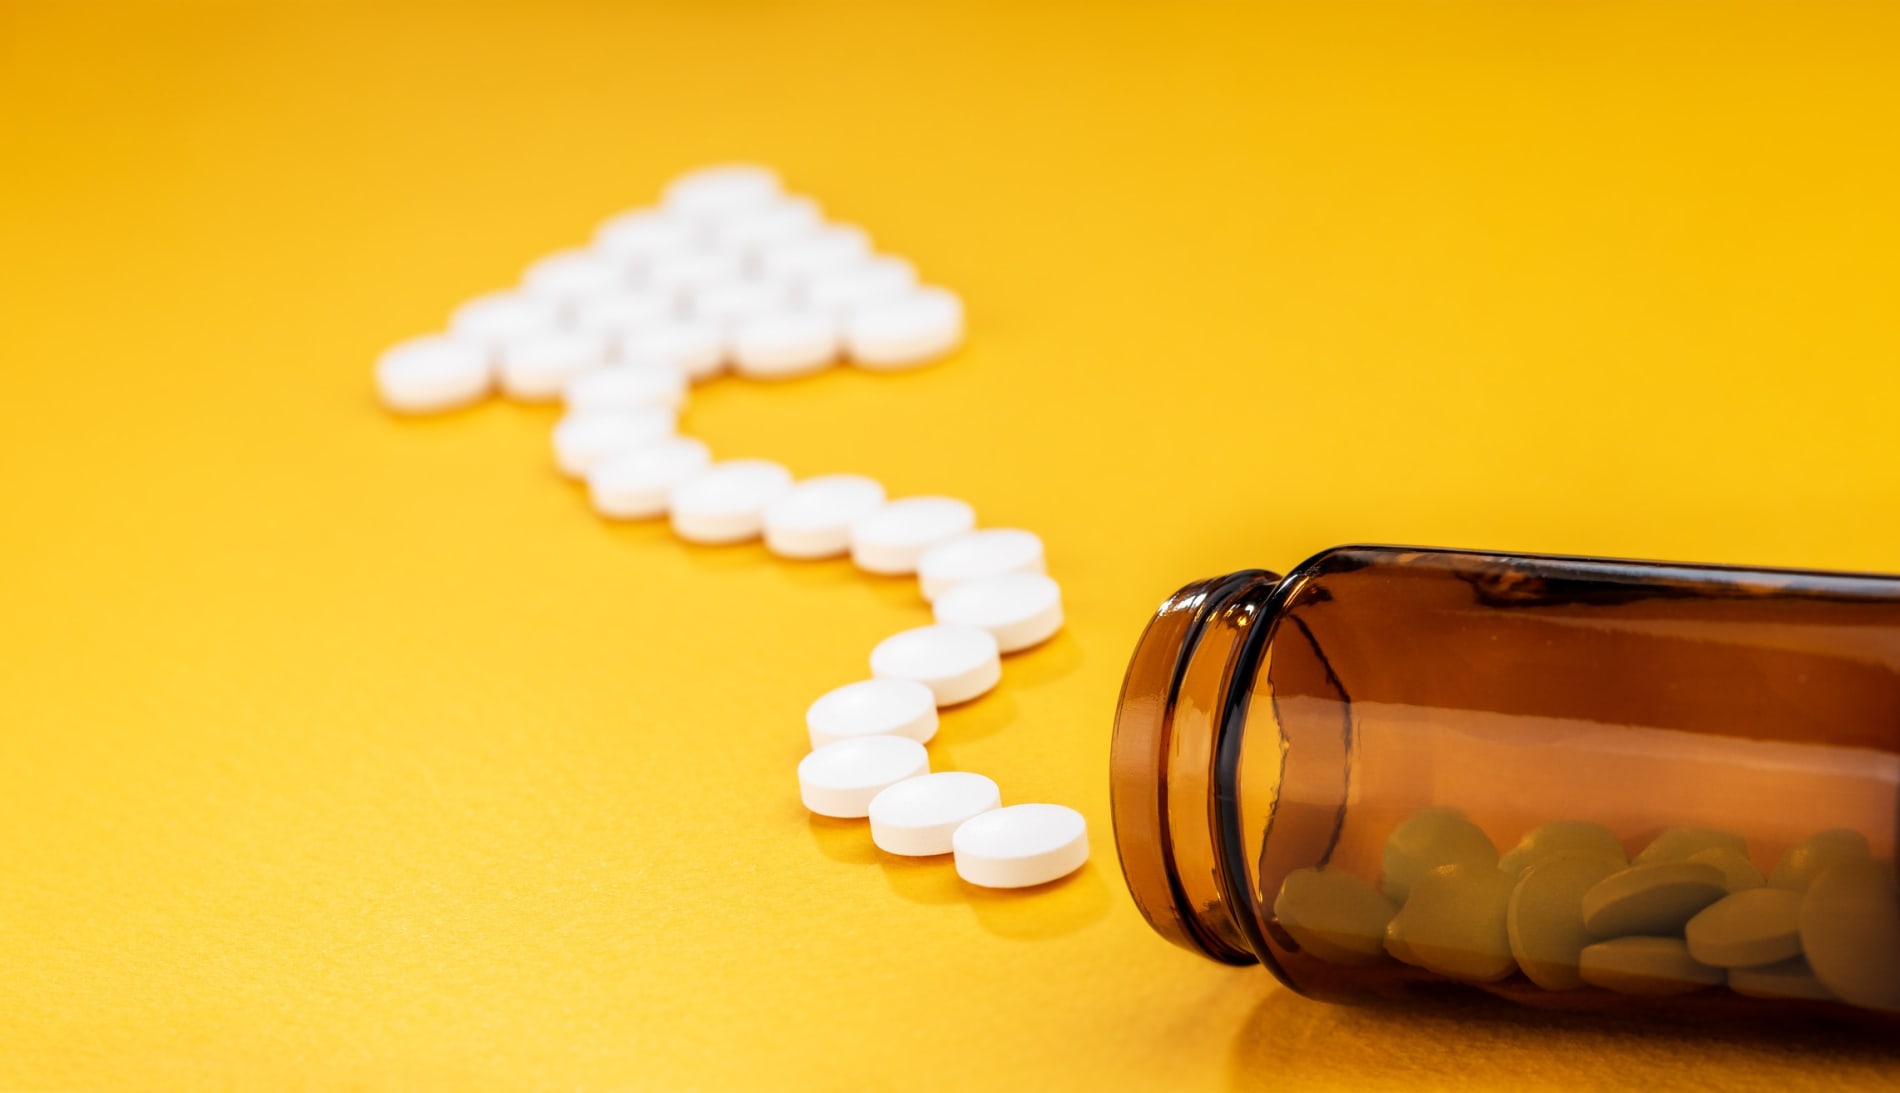 White pills in the form of an arrow, spill out from glass bottle on yellow background with copy space. Vitamins and dietary supplements concept.